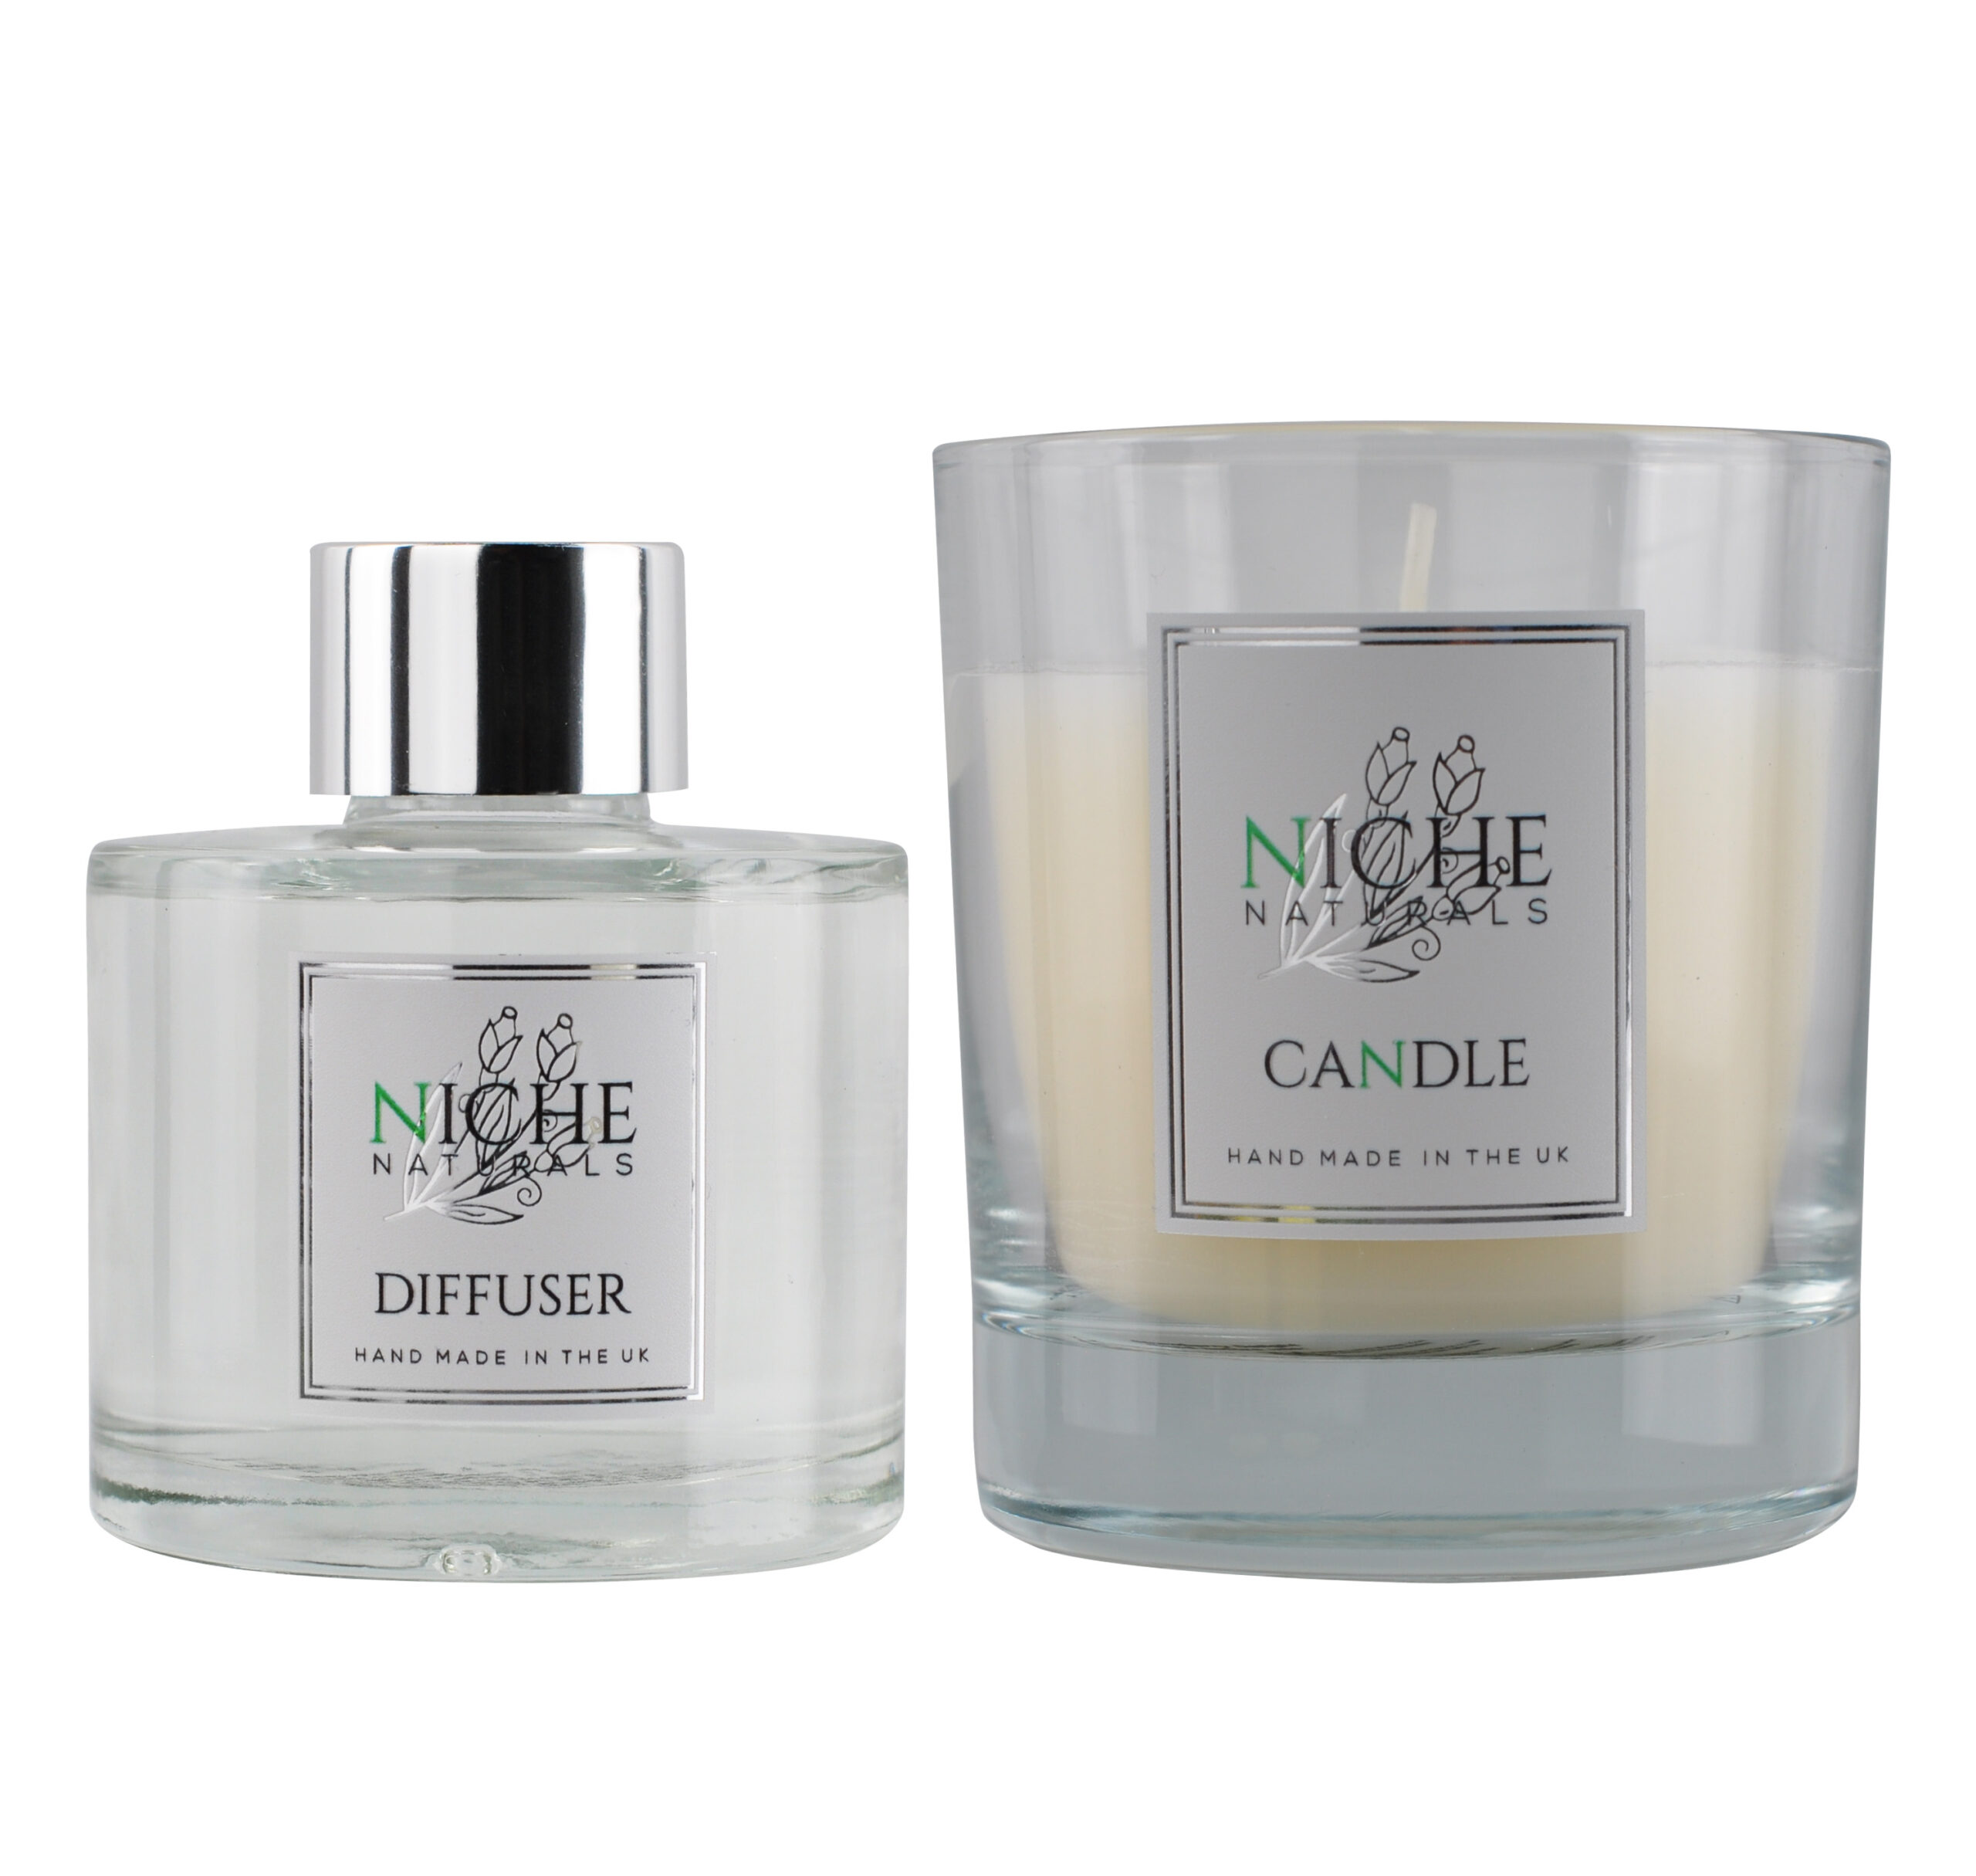 Fragranced Pair (pick your fragrance and receive a matching candle and diffuser)